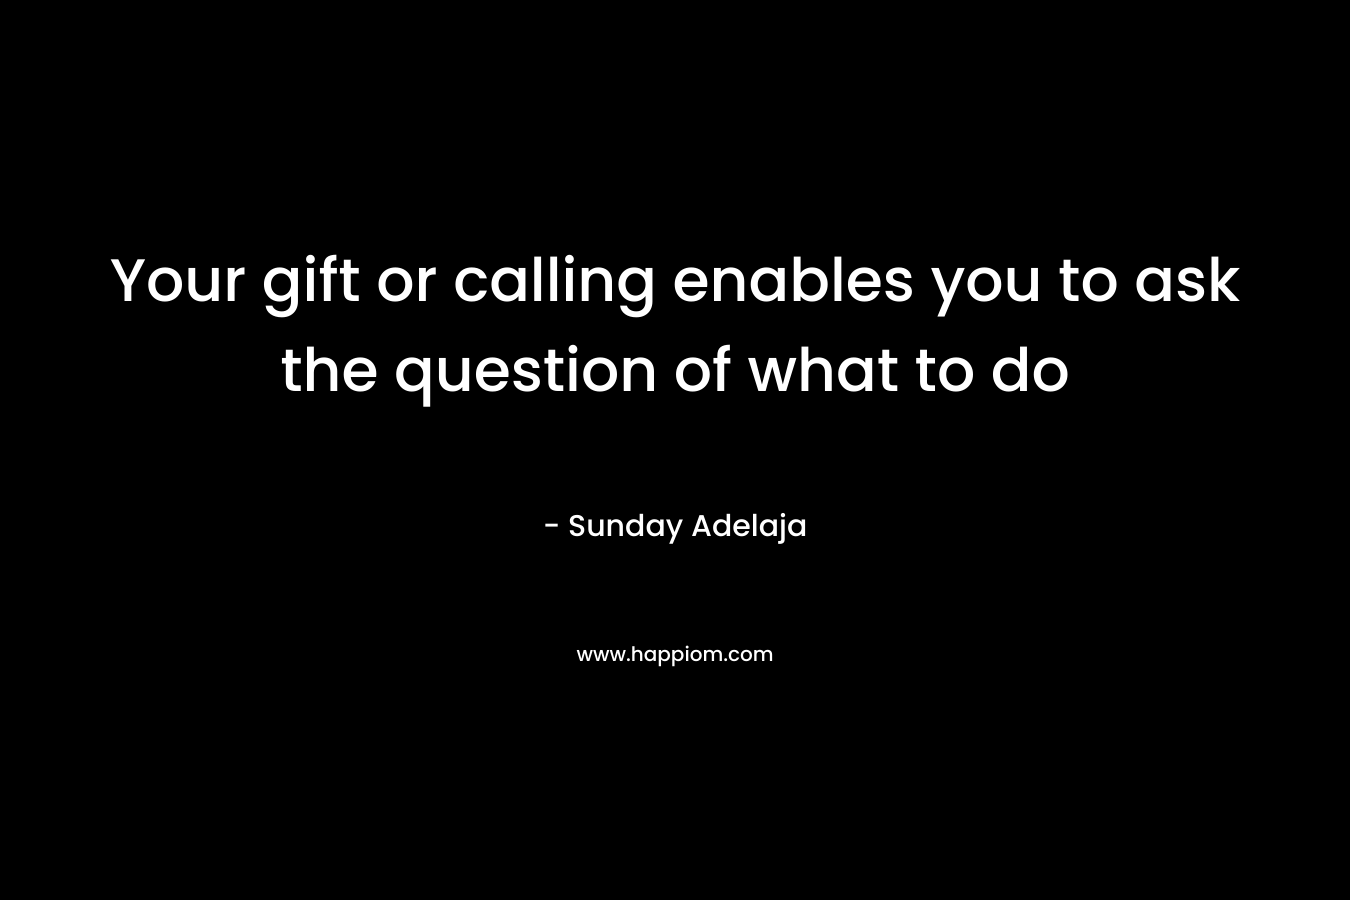 Your gift or calling enables you to ask the question of what to do